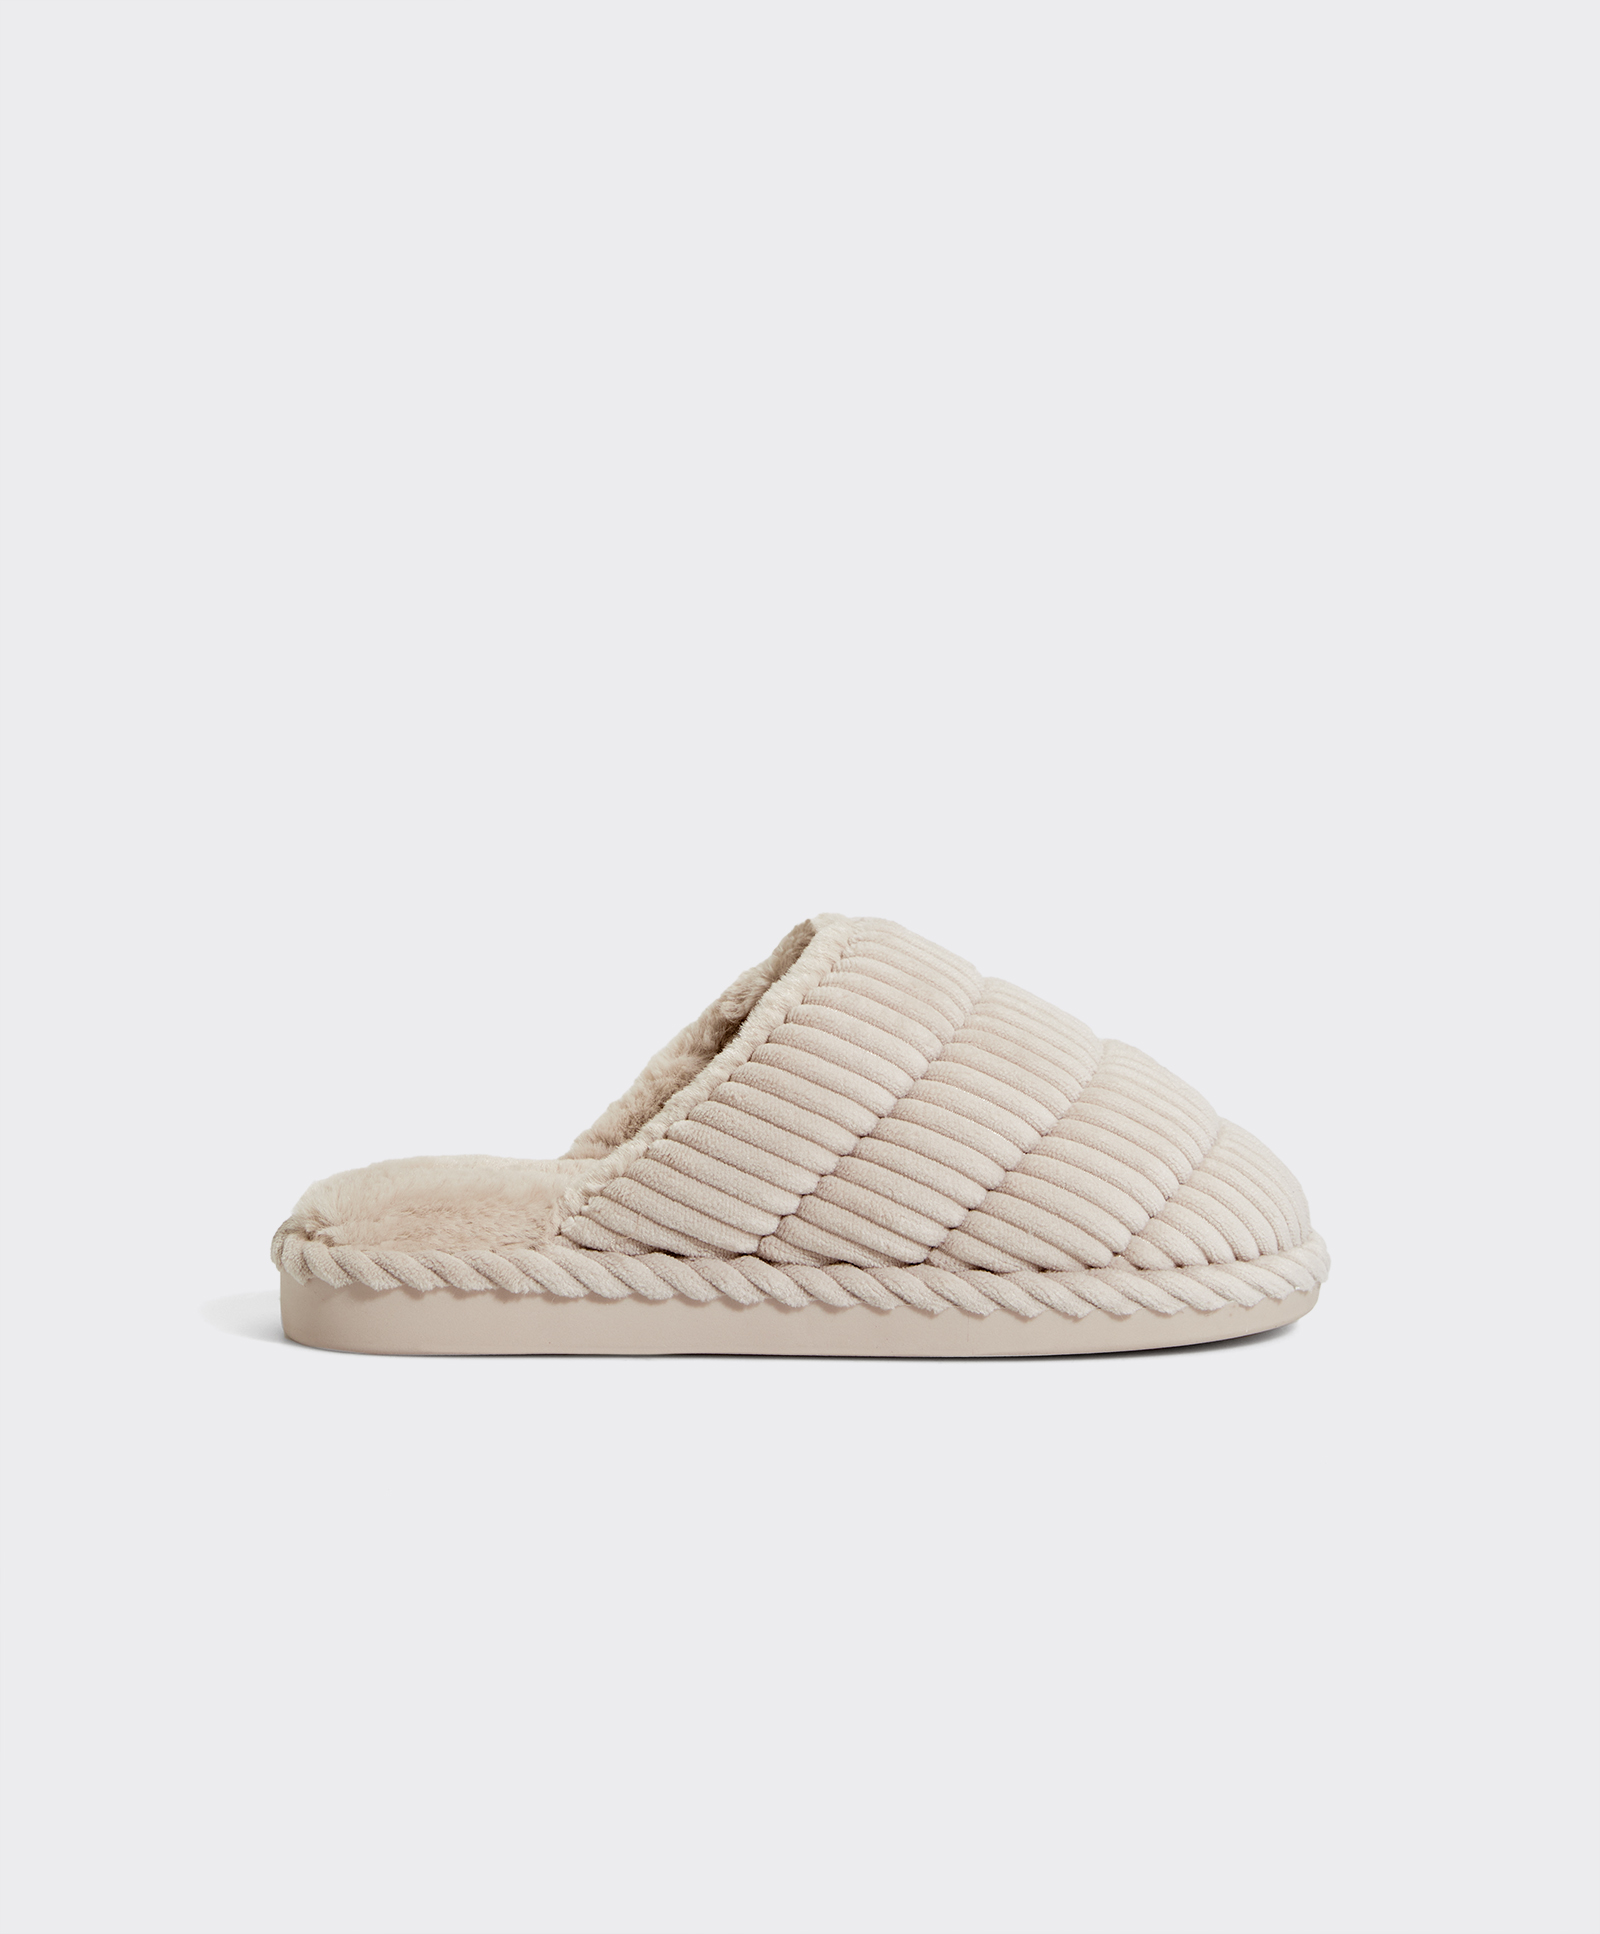 Padded corduroy slippers